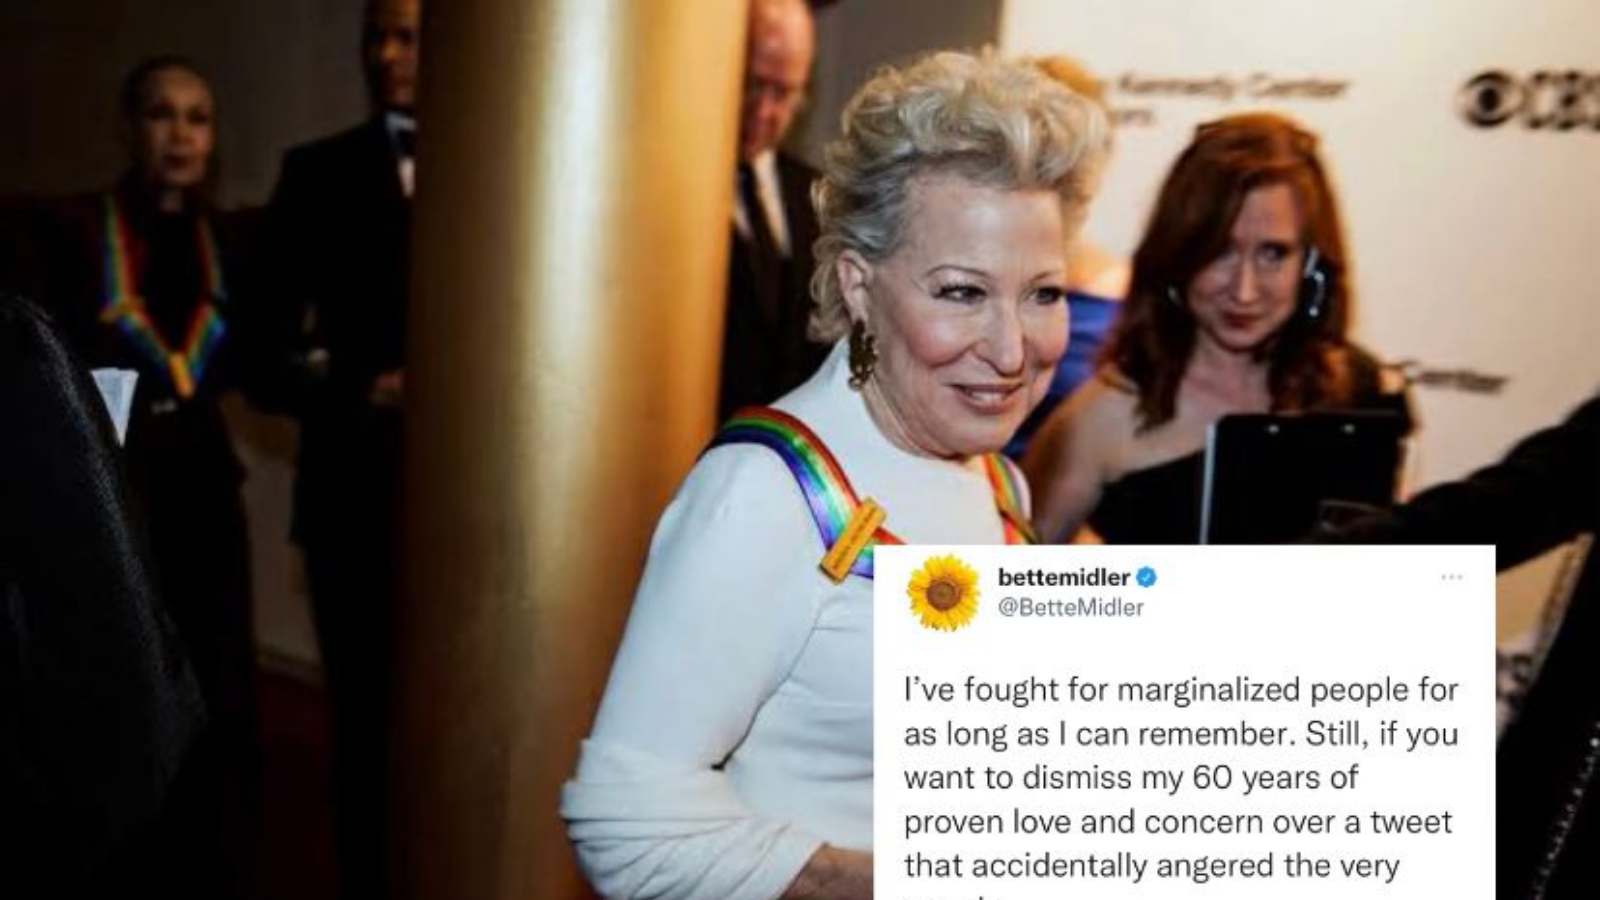 Bette Midler responds to the criticism she received for her transphobic and islamophobic tweets